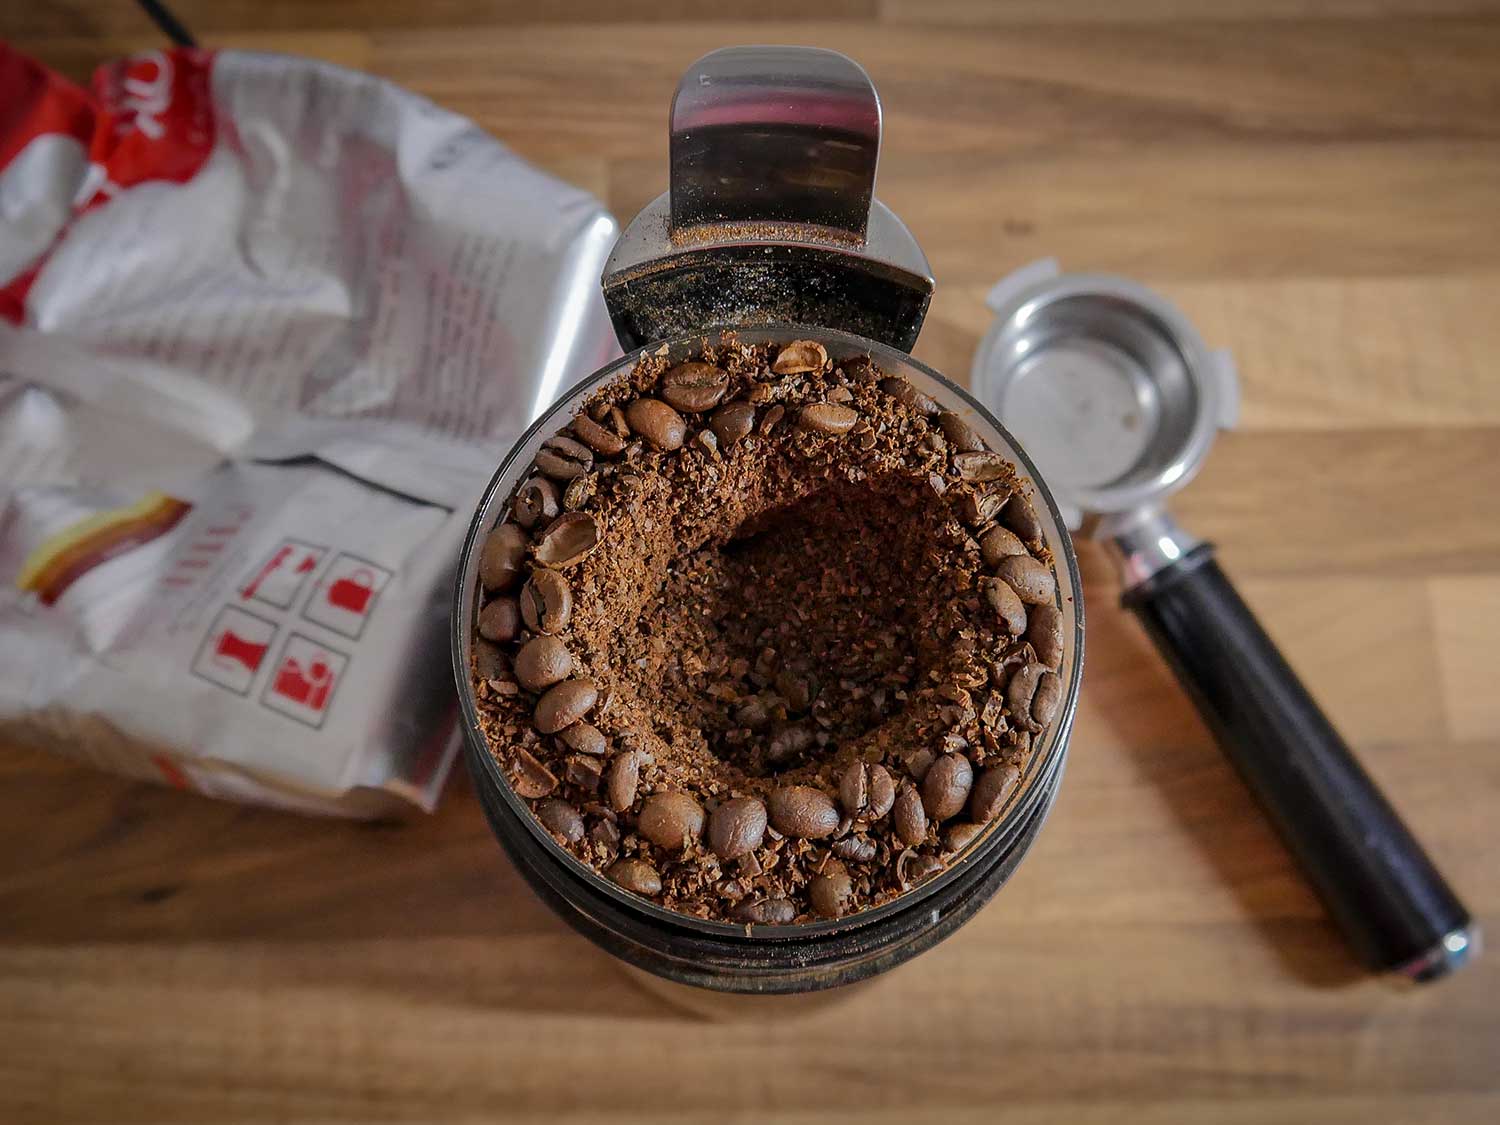 Grind your coffee beans for a fresher, tastier cup of coffee. Any of these grinders will get the job done.